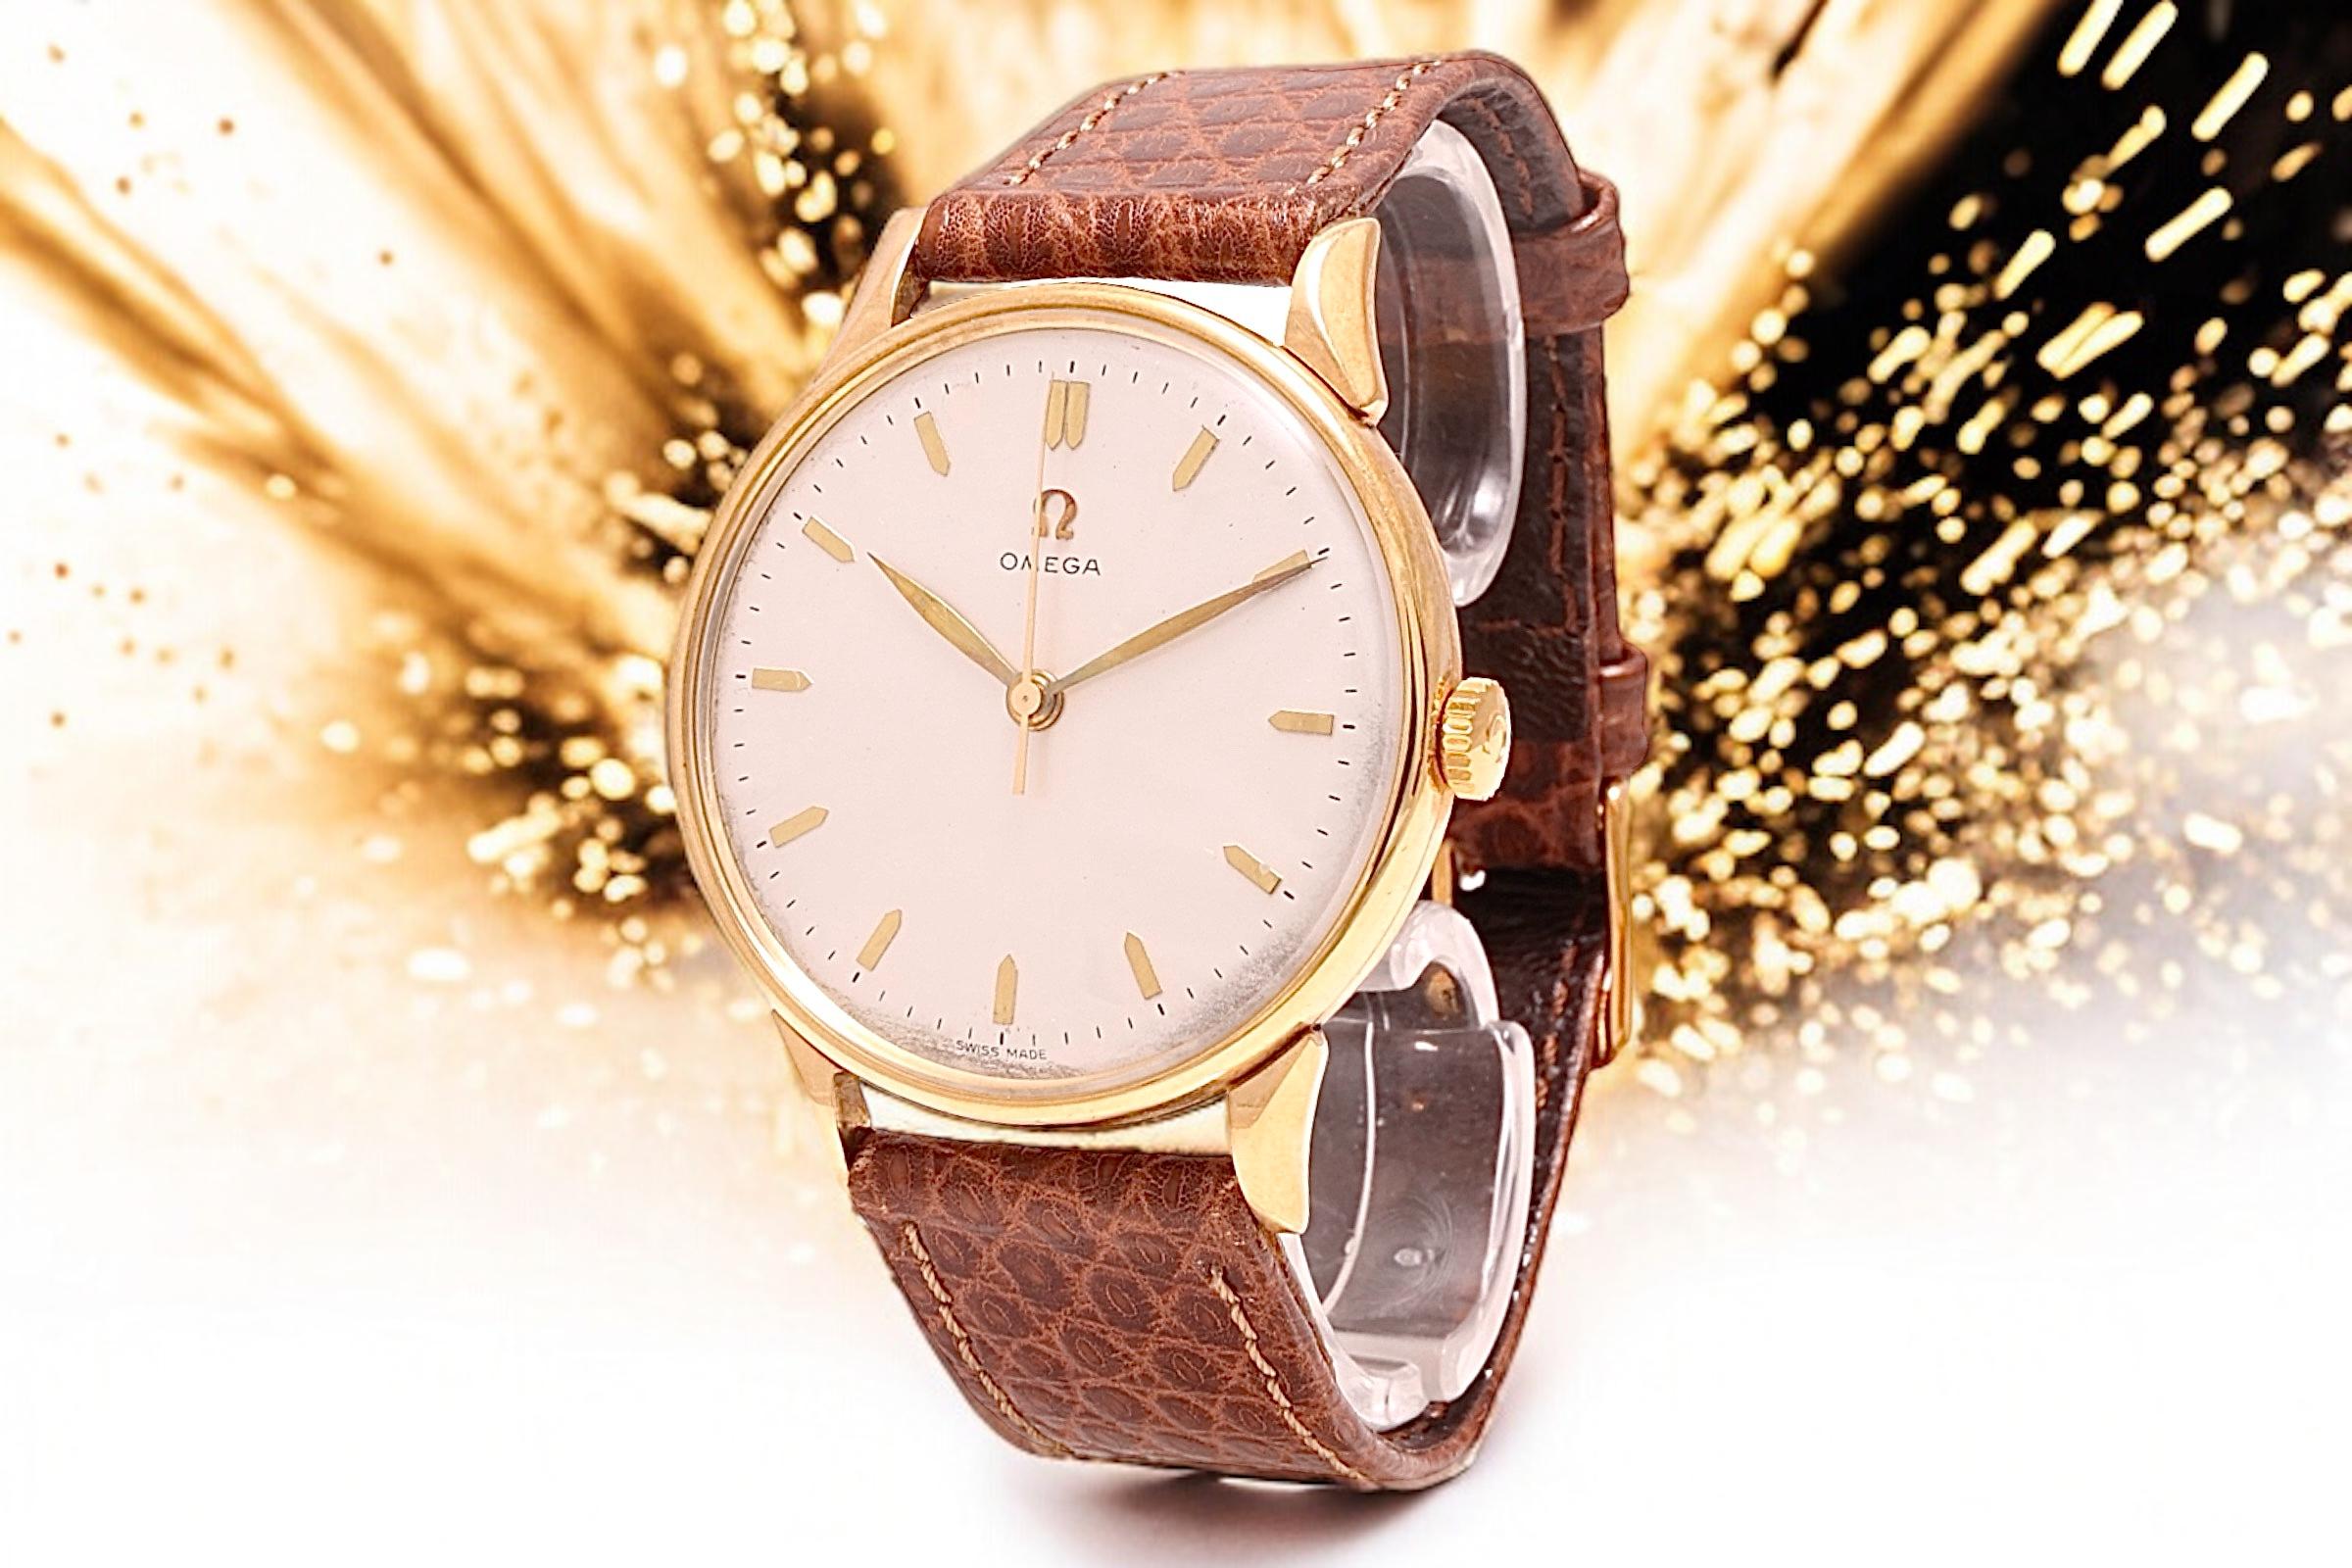 14 Kt Solid Yellow Gold Omega Jumbo, Cal 30 T2 SCPC Collectors Wrist Watch For Sale 9